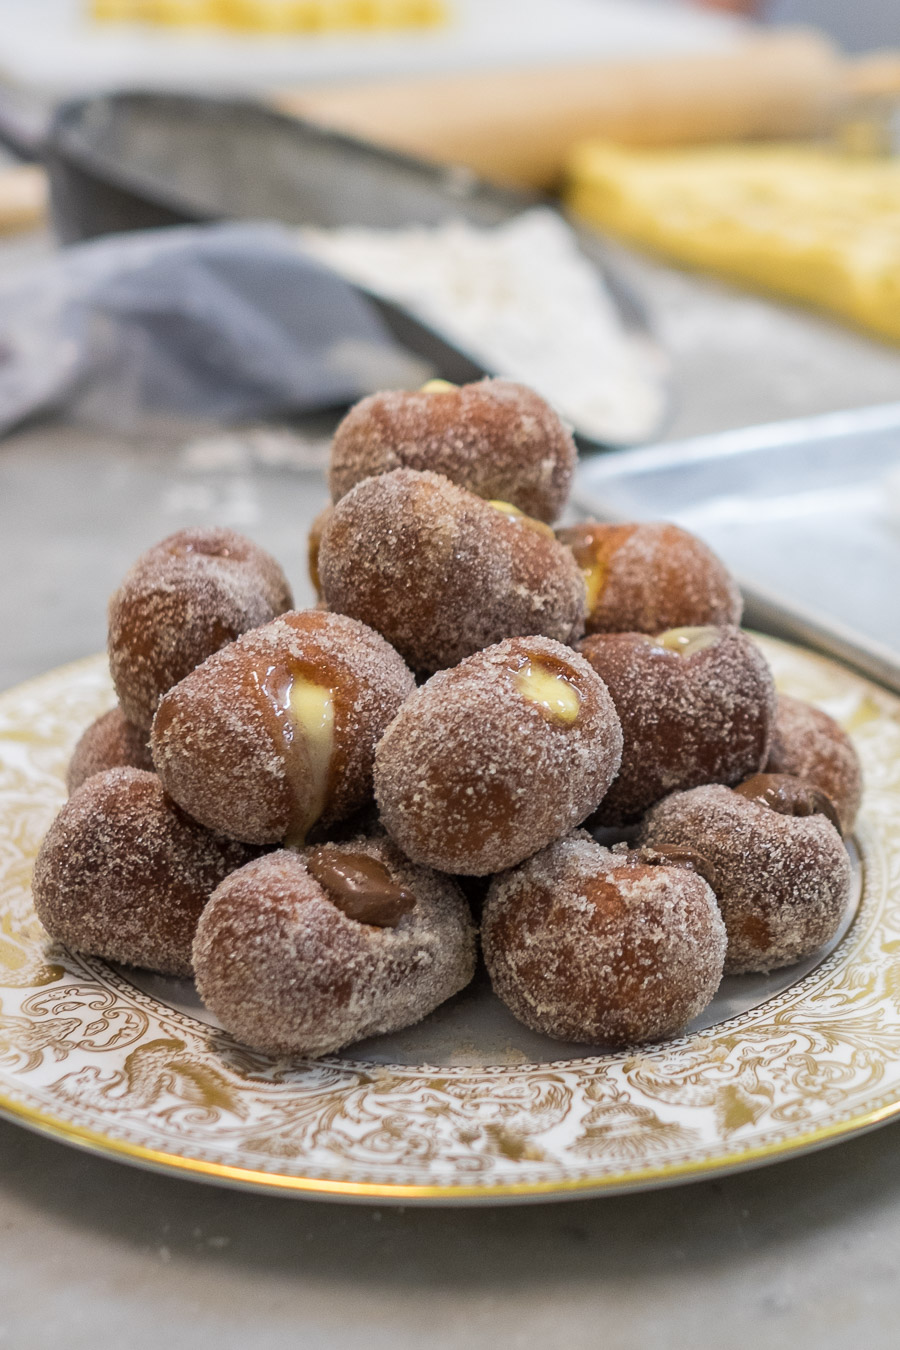 Doughnuts with lemon curd and Nutella.